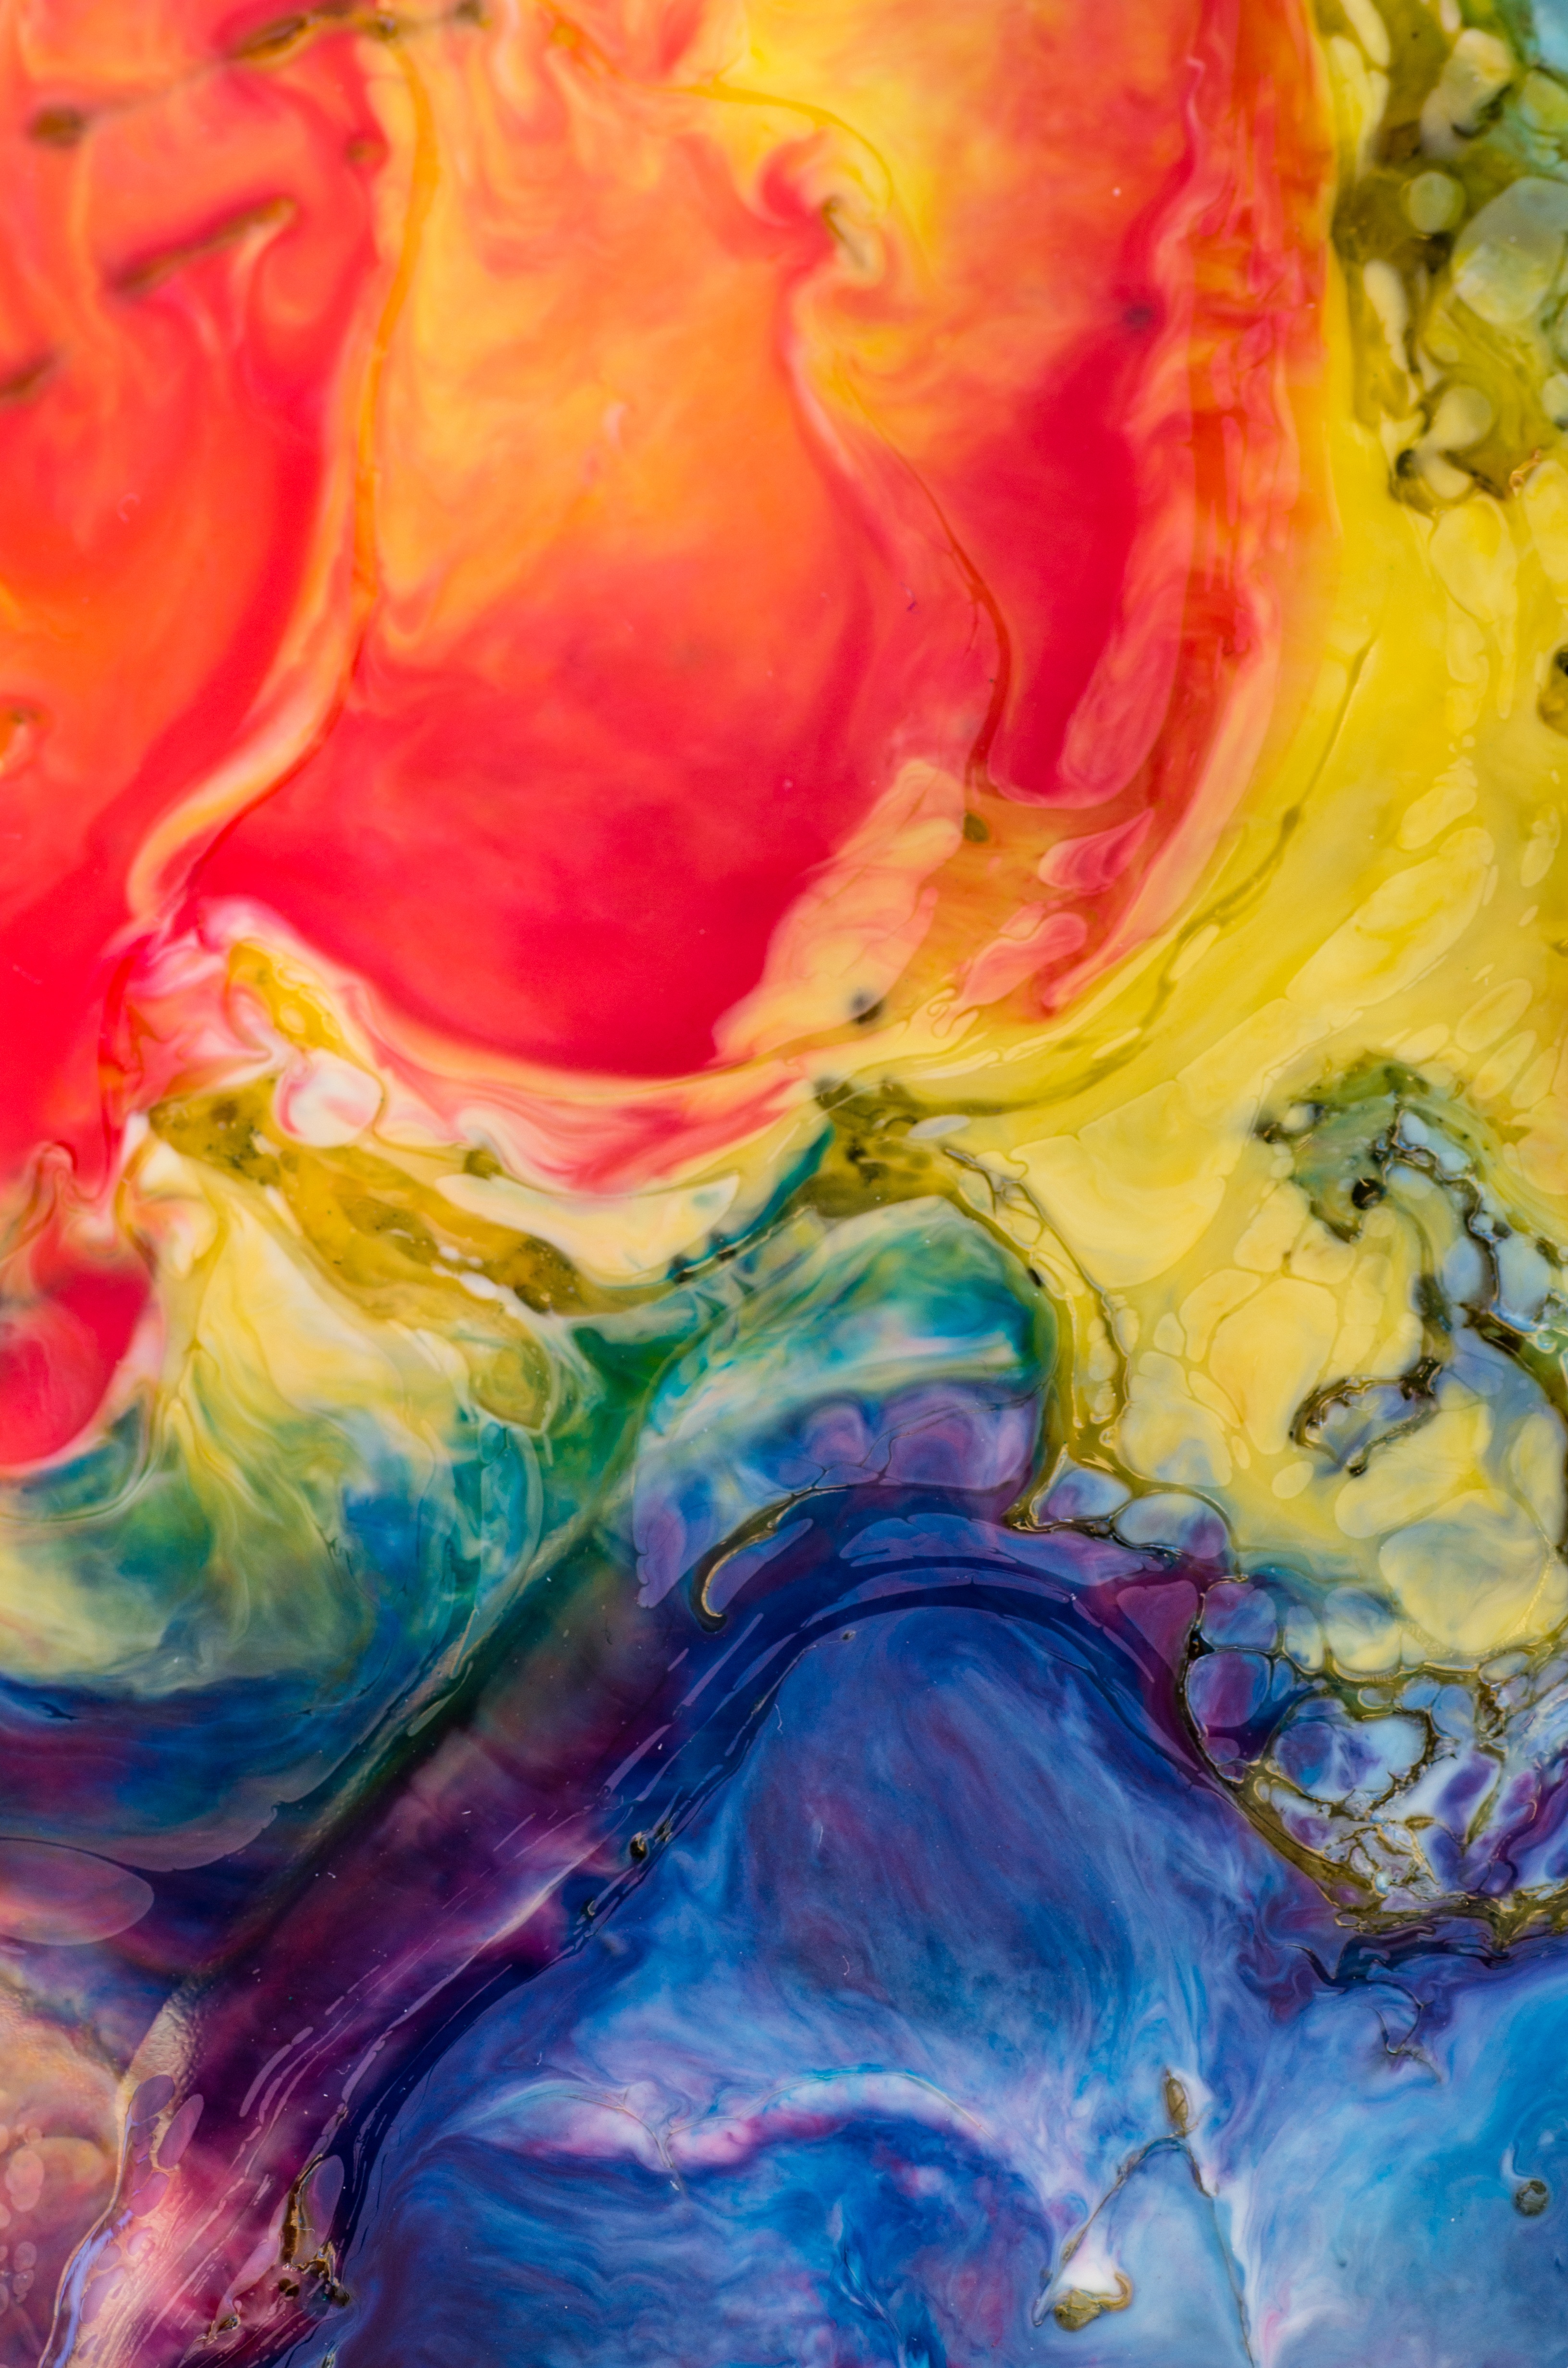 colourful, colorful, motley, abstract, multicolored, paint, stains, spots UHD